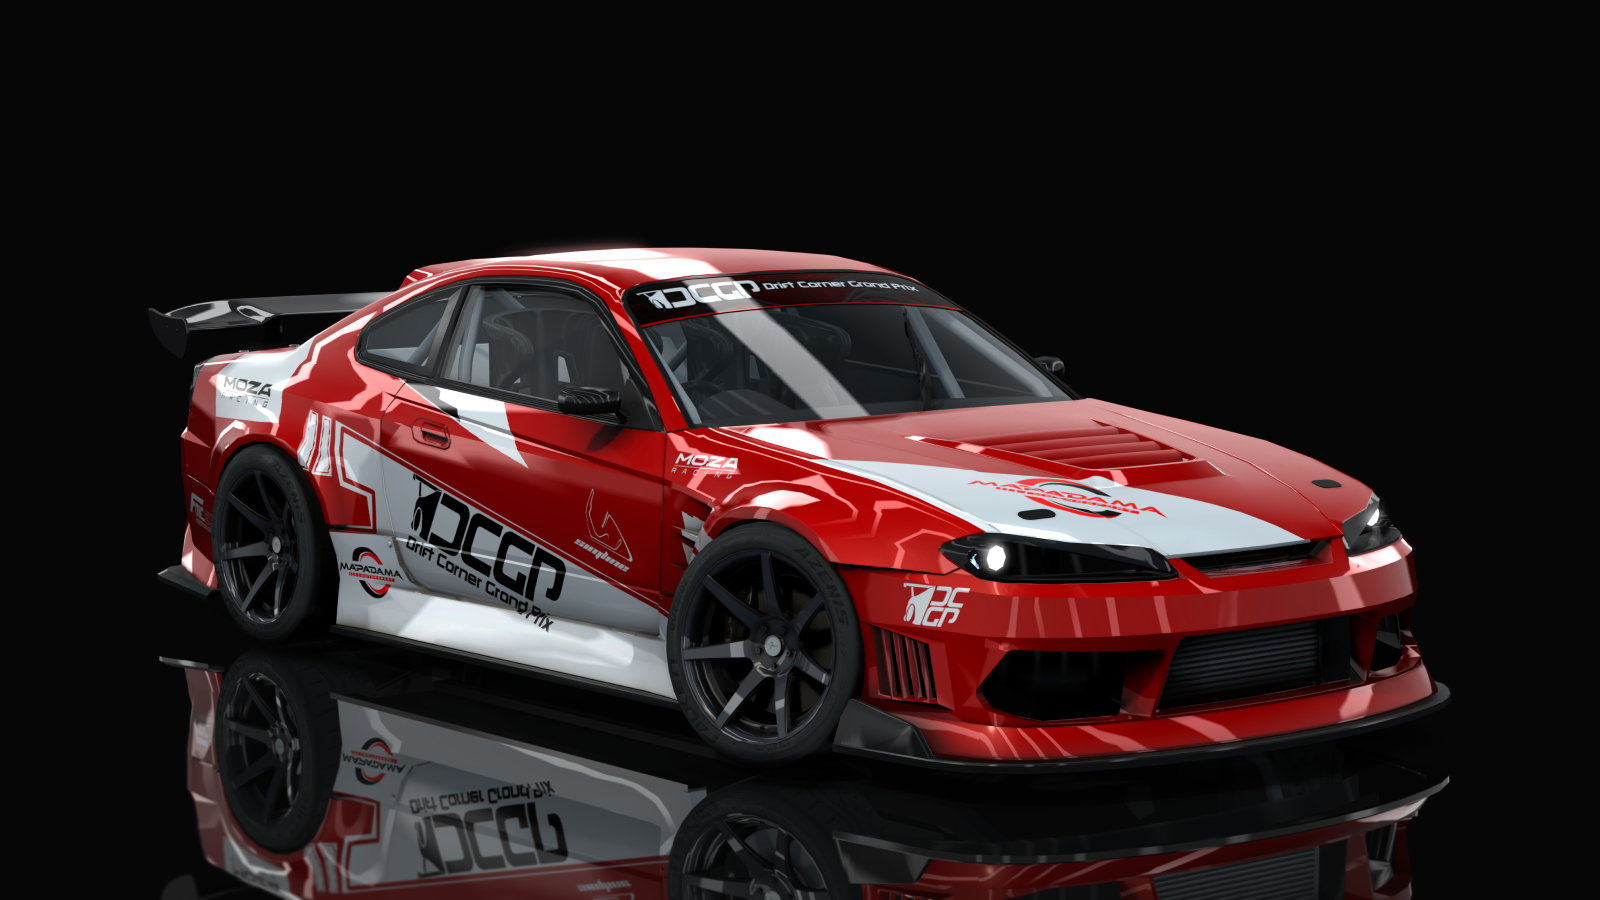 DCGP S9 NISSAN S15, skin red